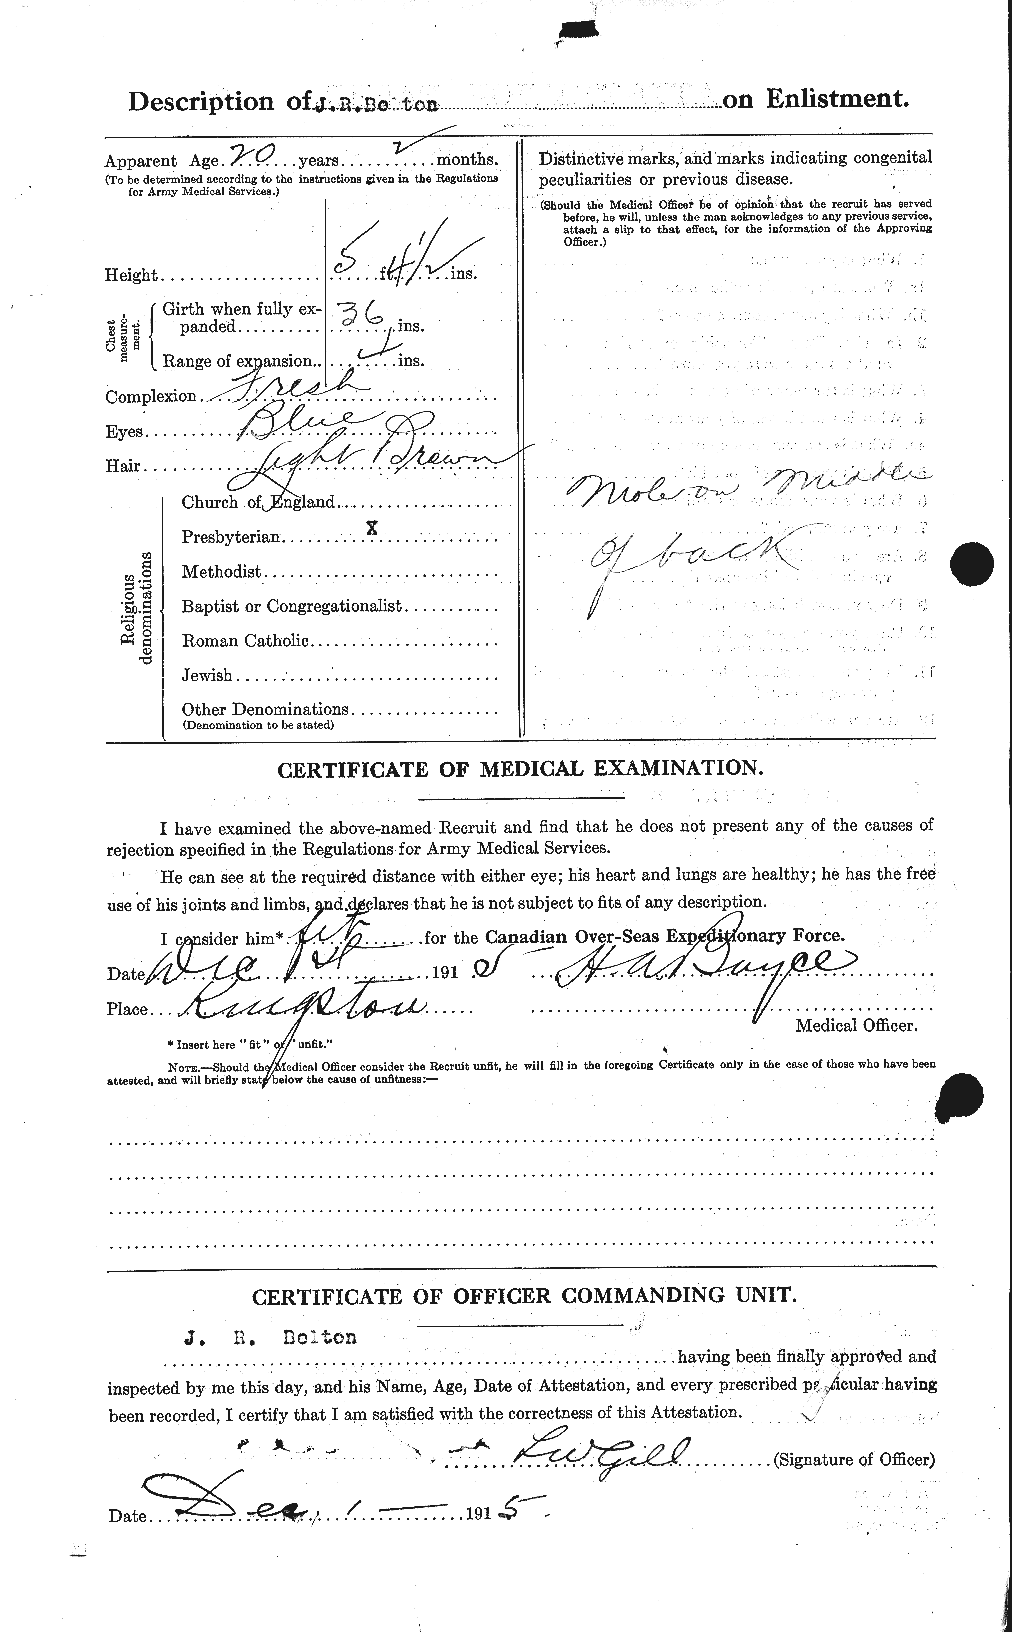 Personnel Records of the First World War - CEF 233661b